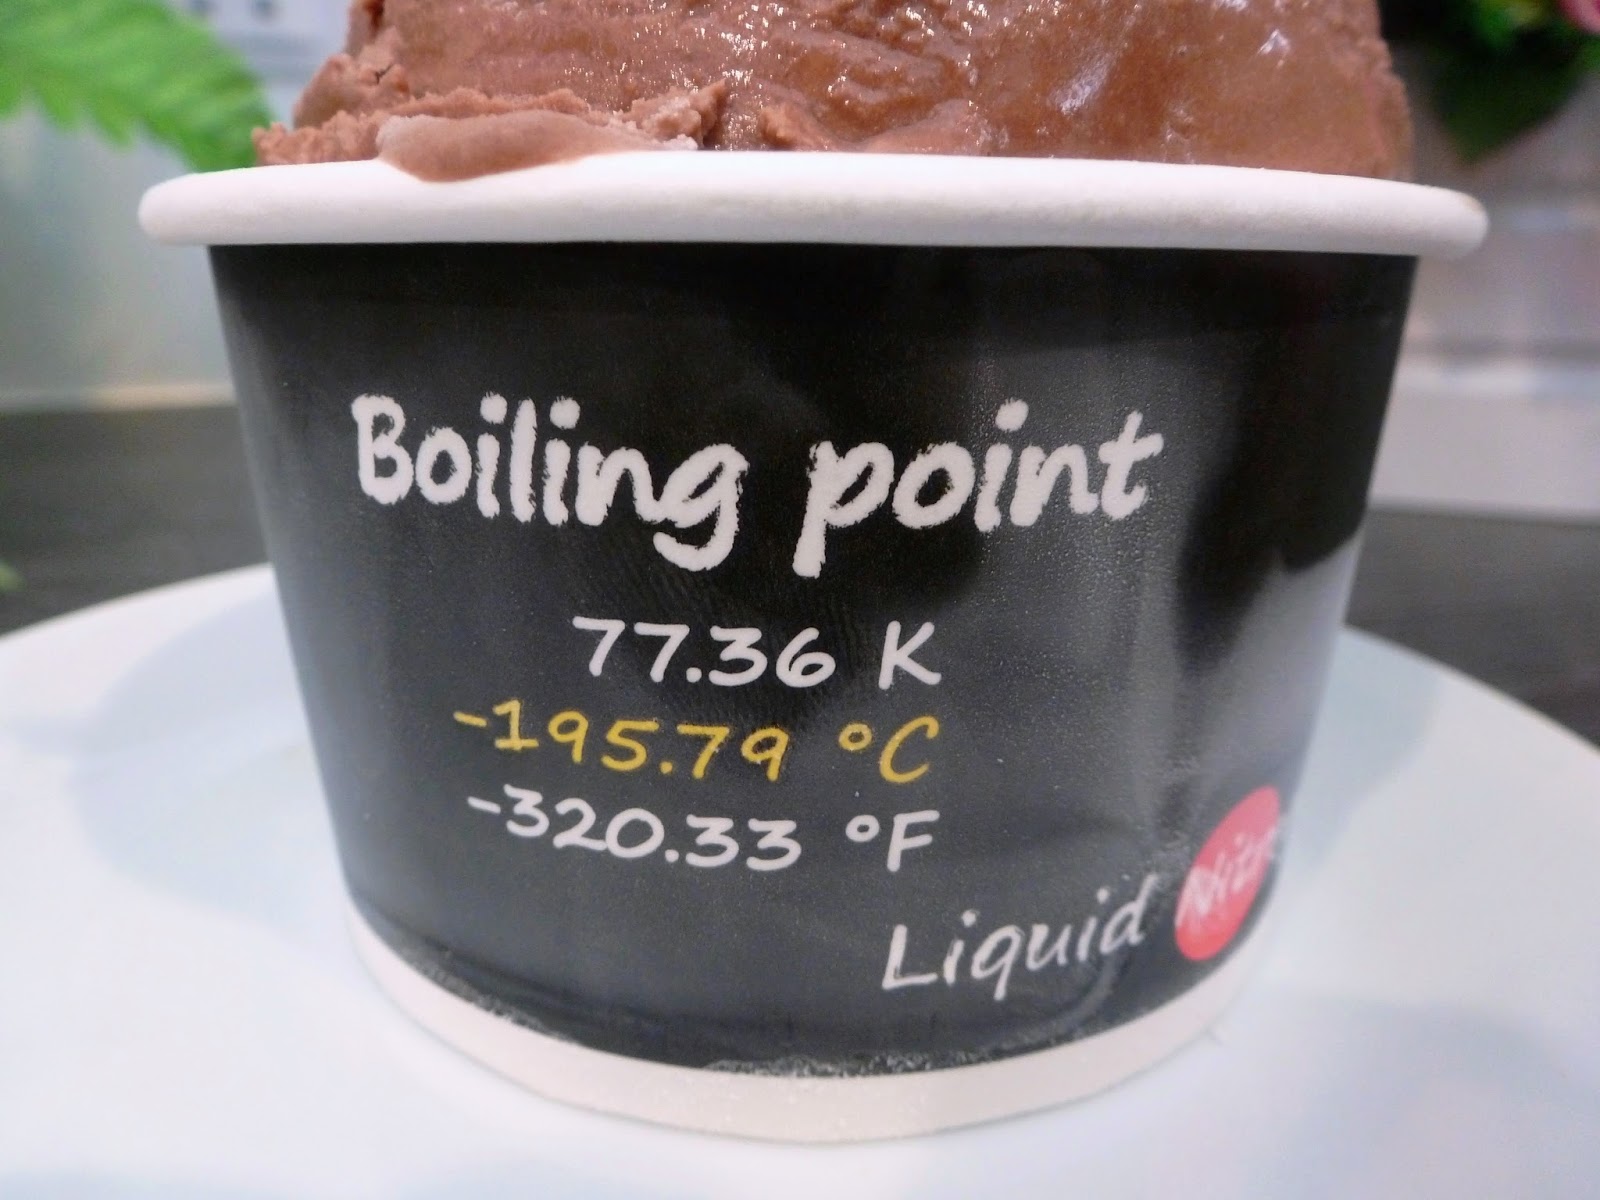 What is the boiling point of liquid nitrogen?